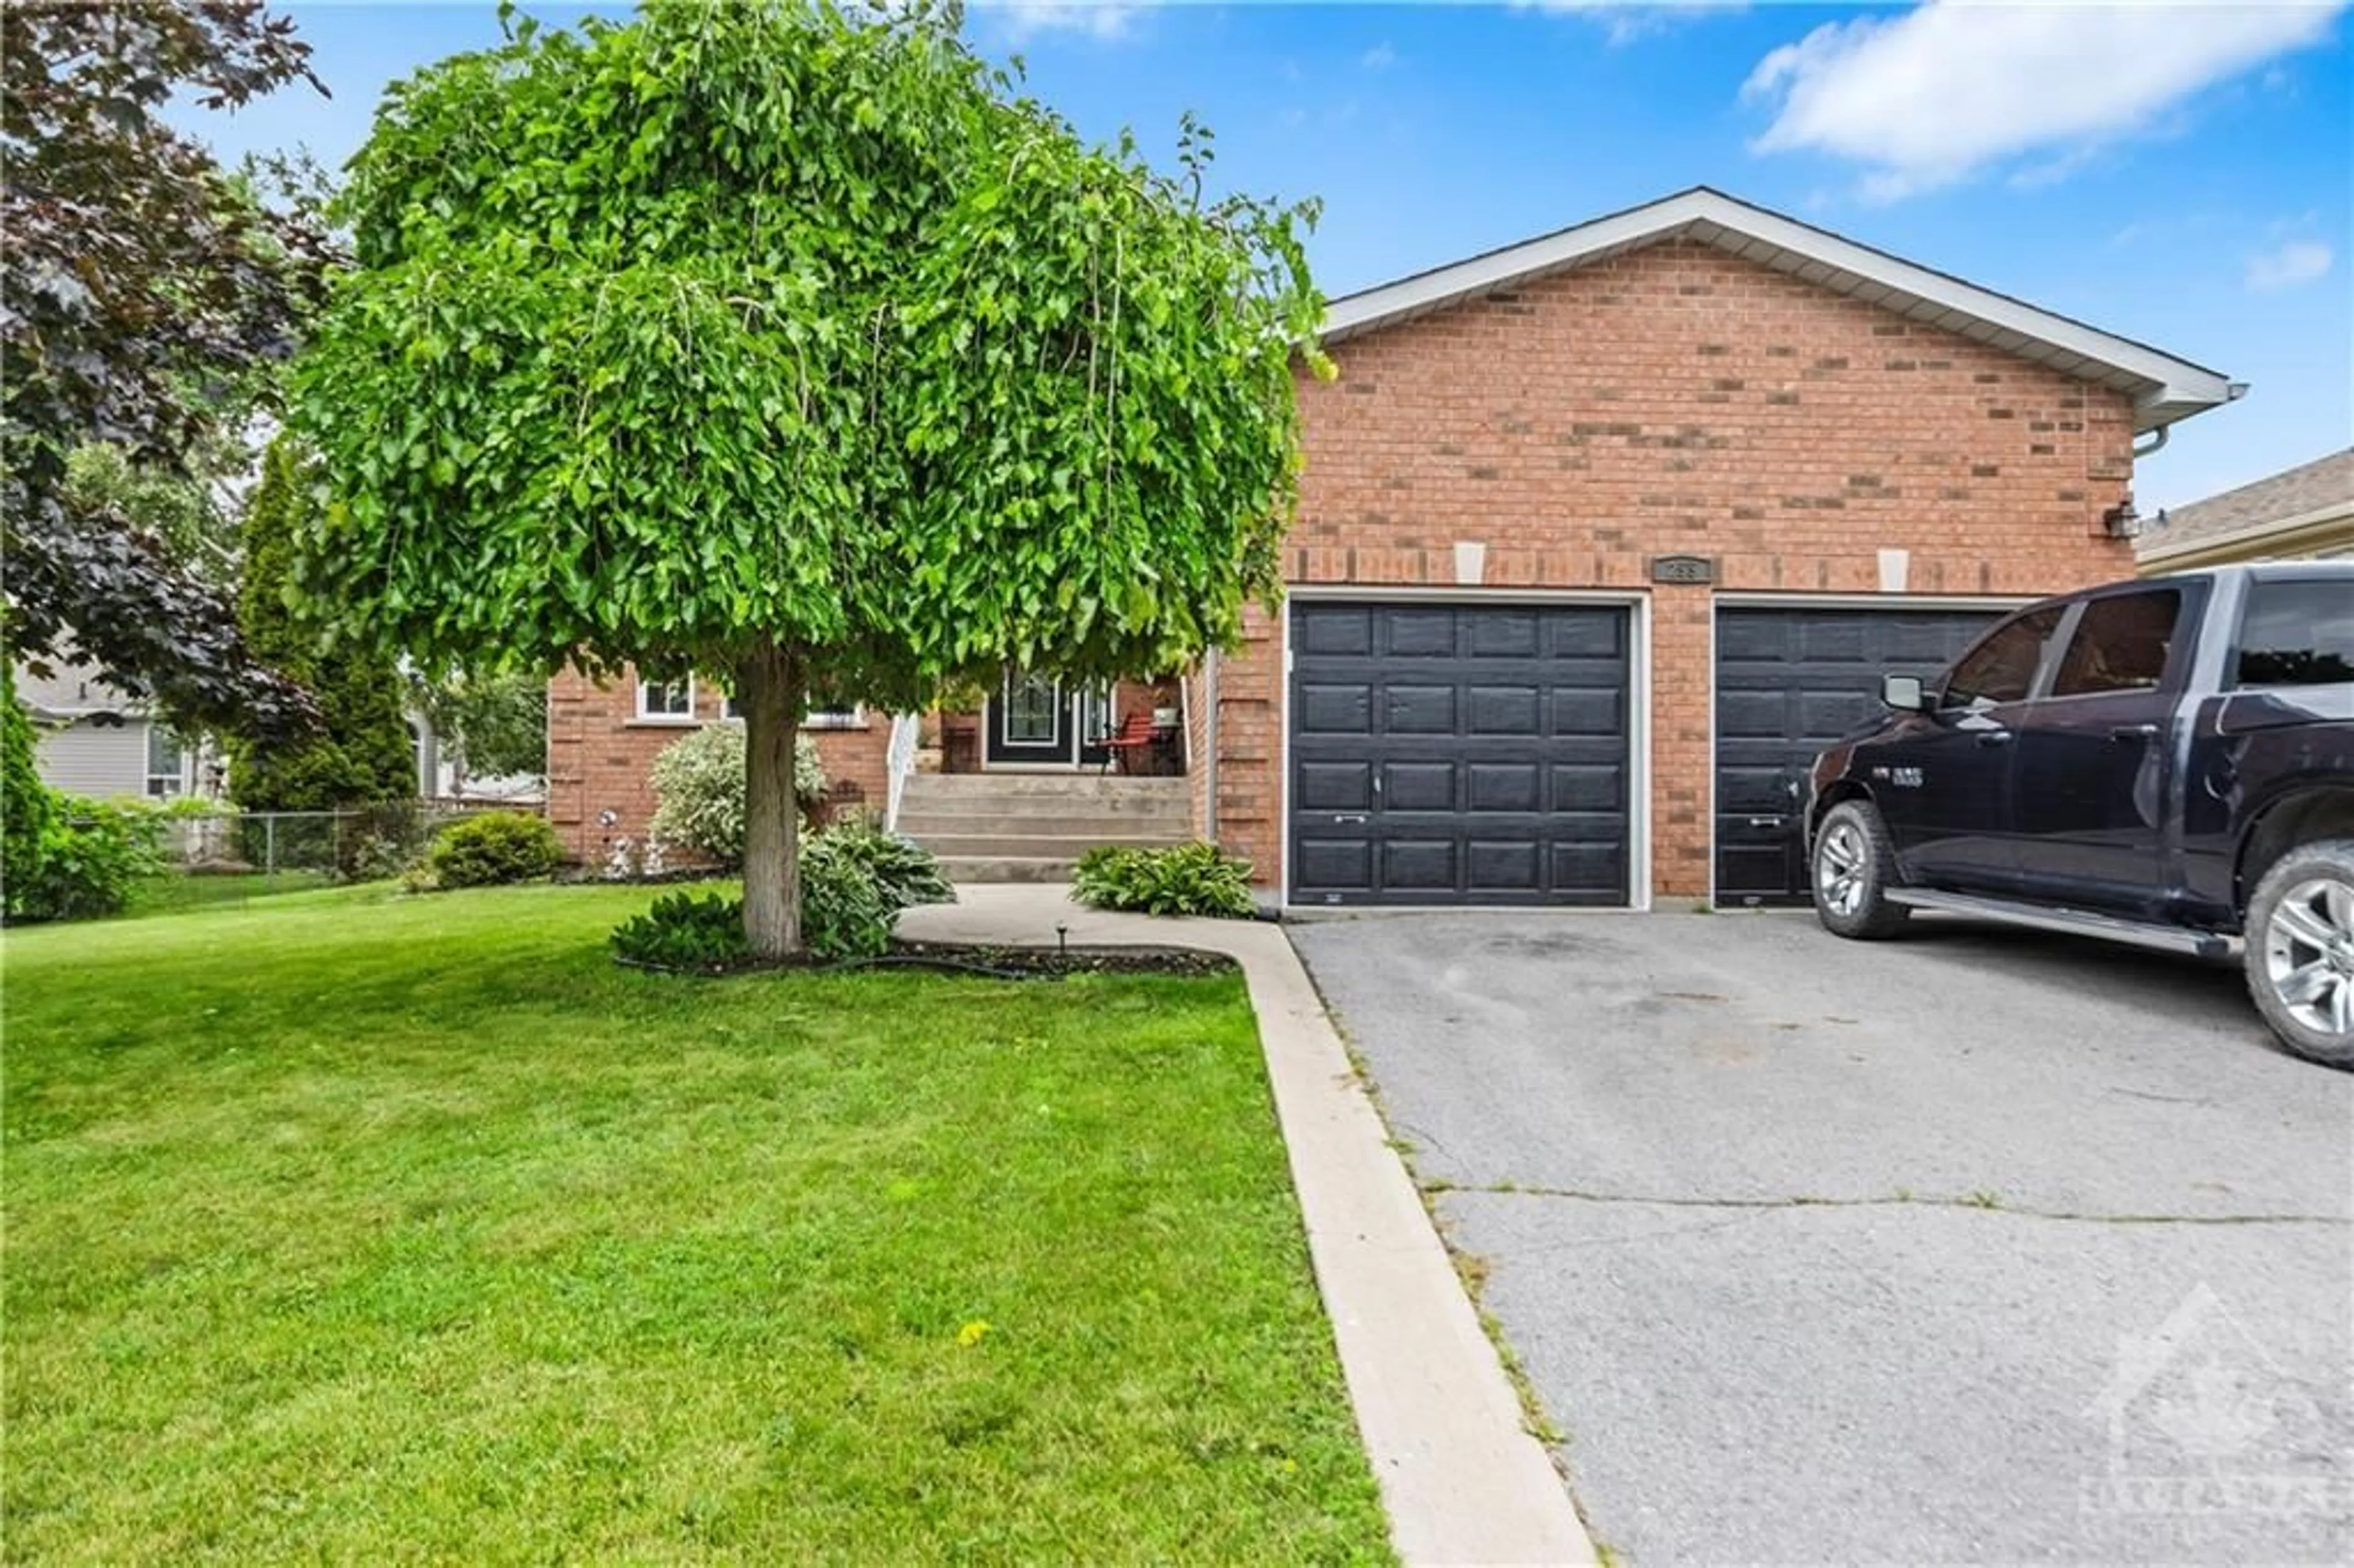 Home with brick exterior material for 255 FRIARHILL Cres, Kingston Ontario K7M 8P4